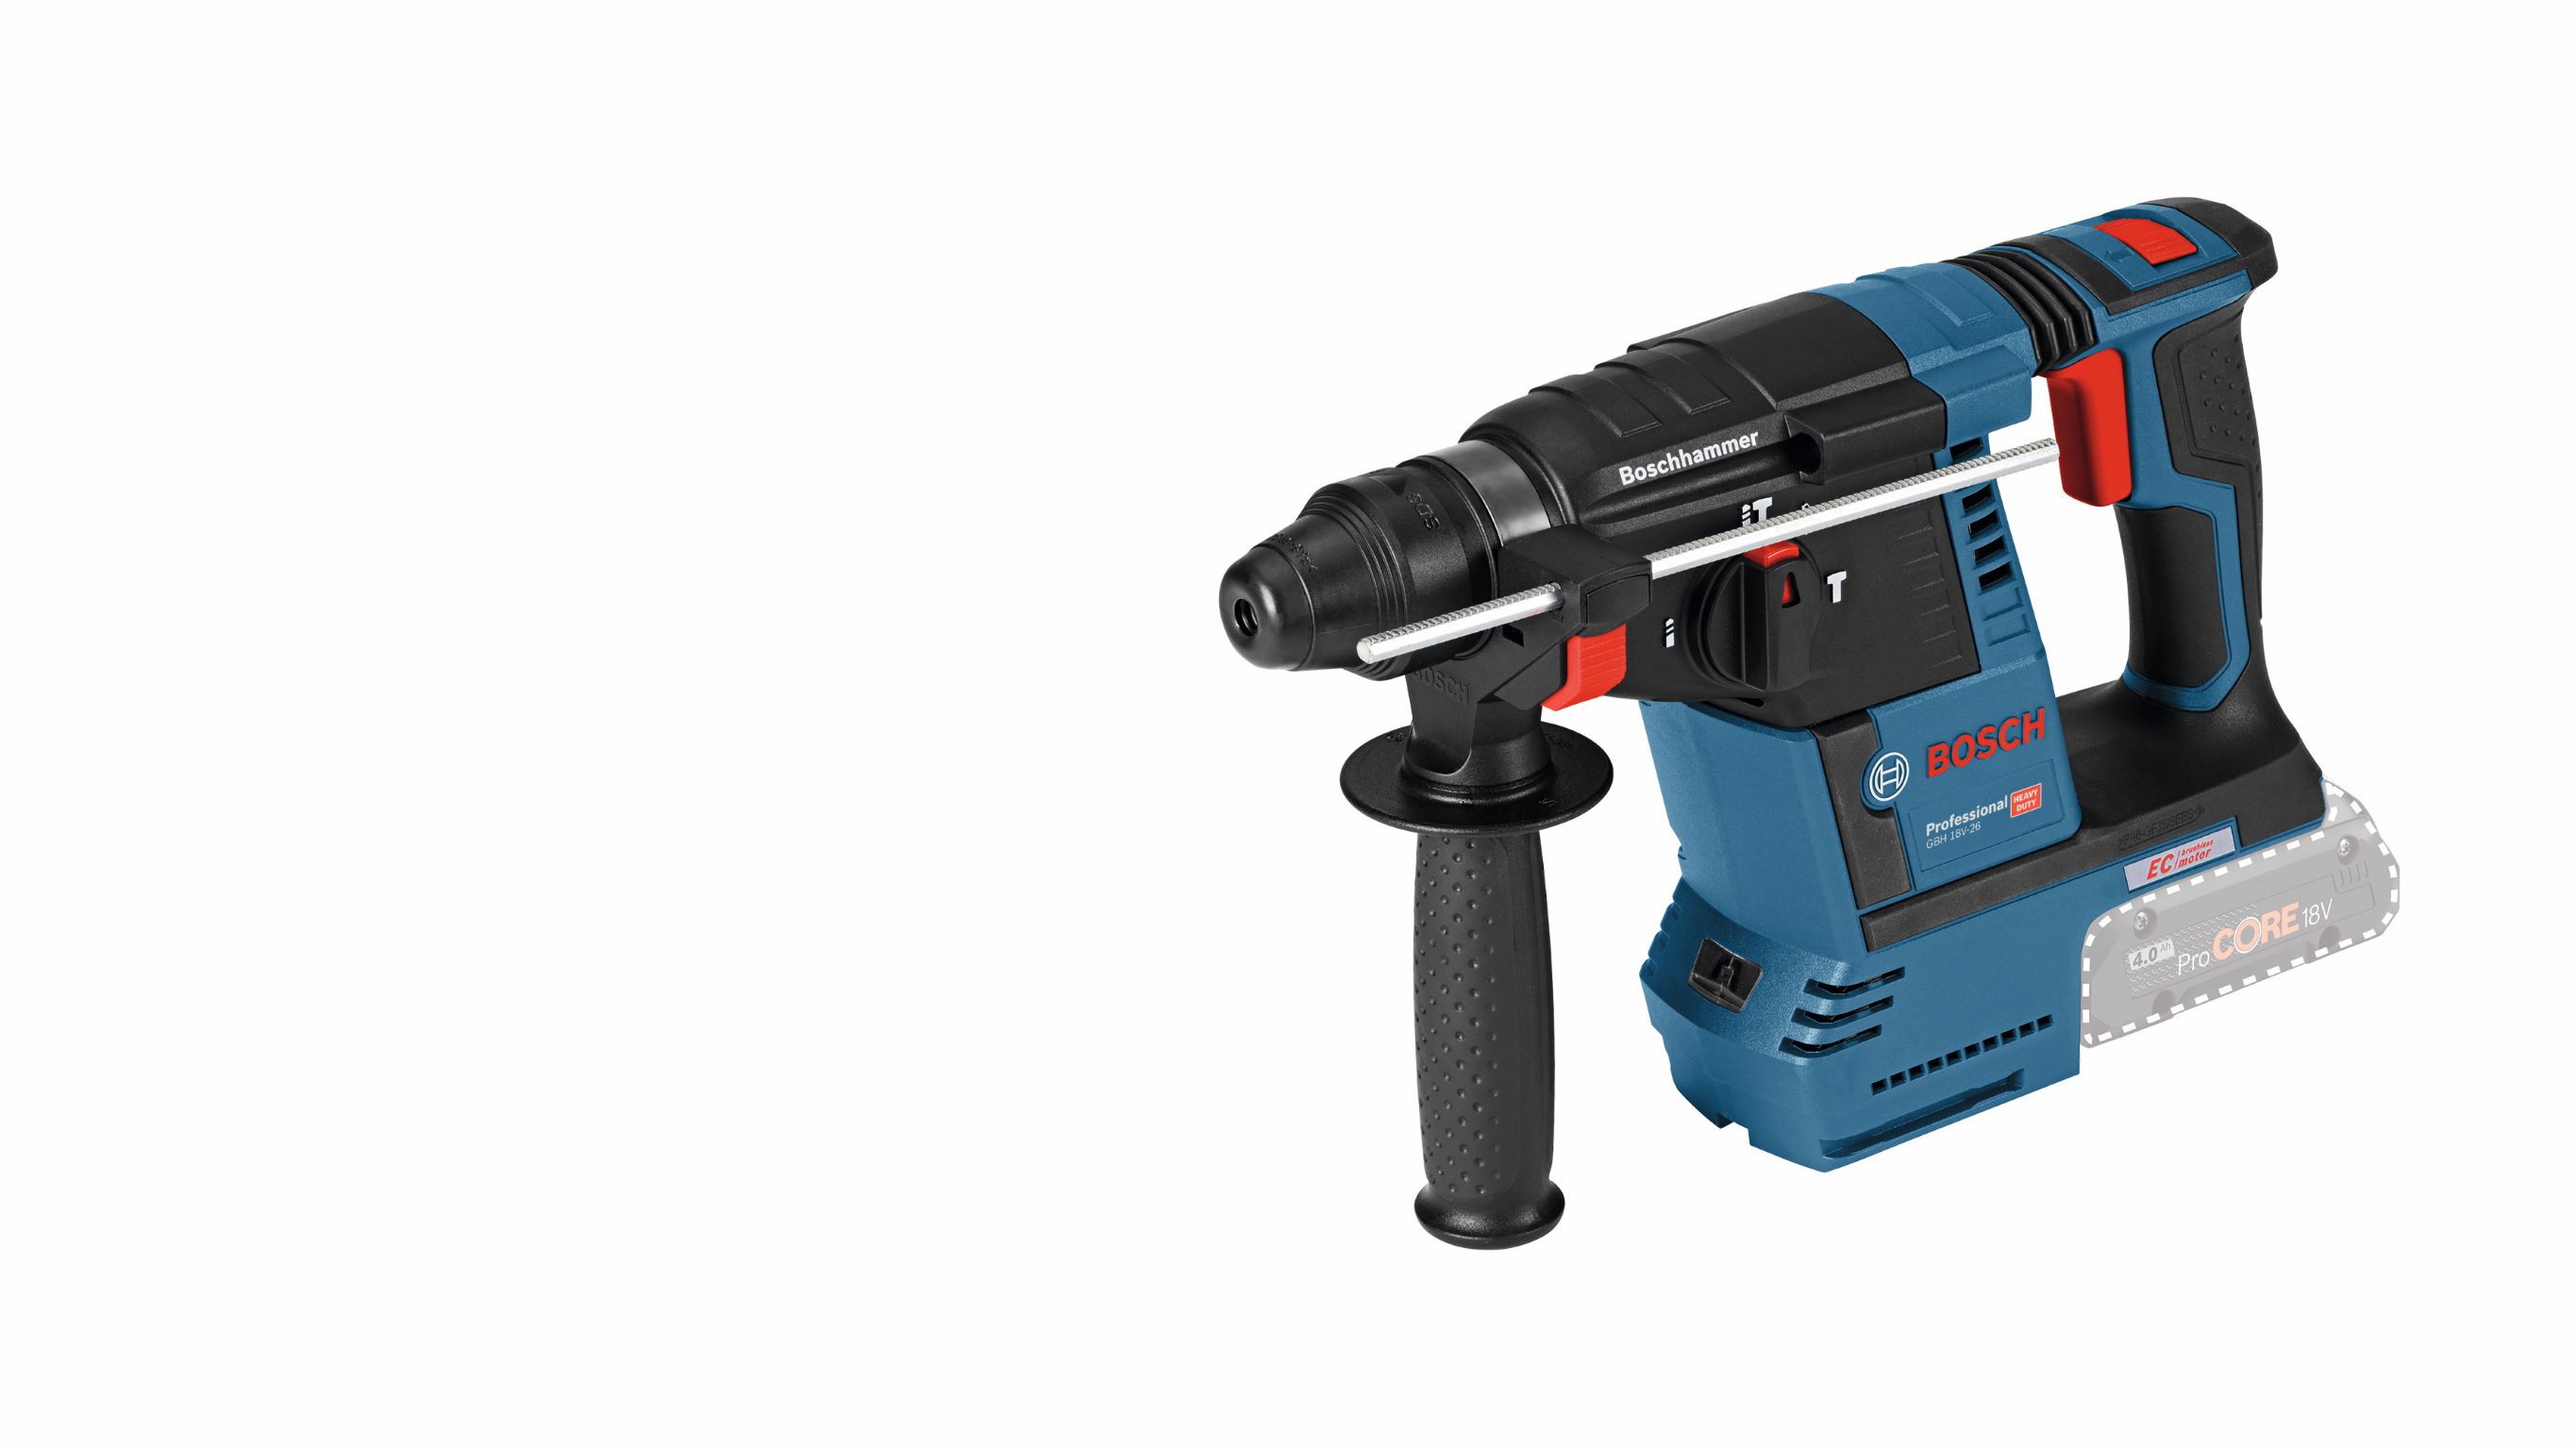 GBH 18V-26 Professional Cordless Rotary Hammer in L-Boxx Bosch - 1